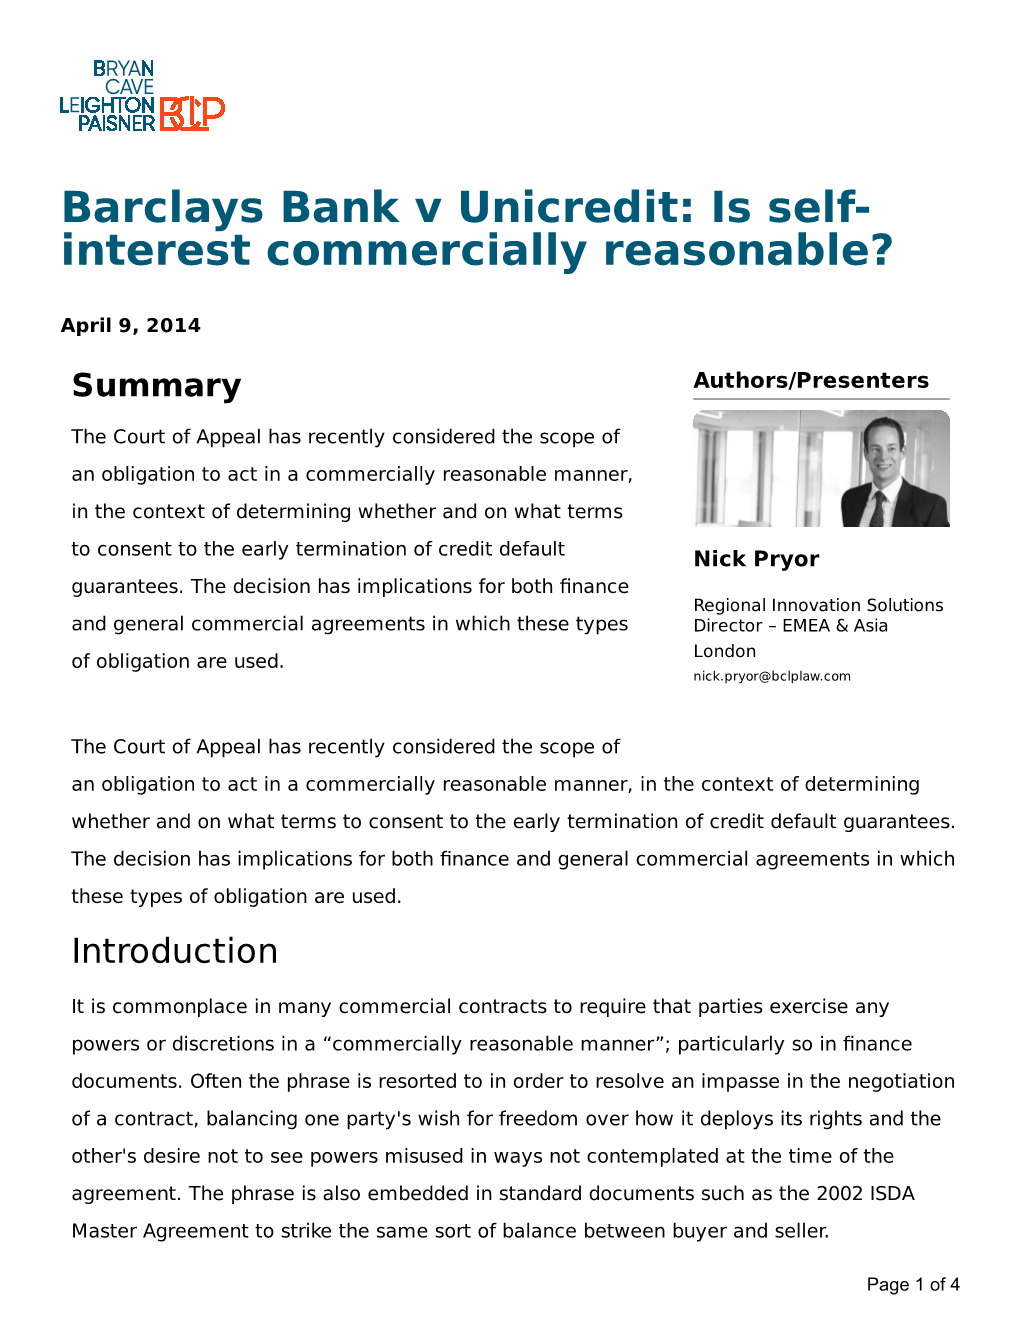 Barclays Bank V Unicredit: Is Self- Interest Commercially Reasonable?